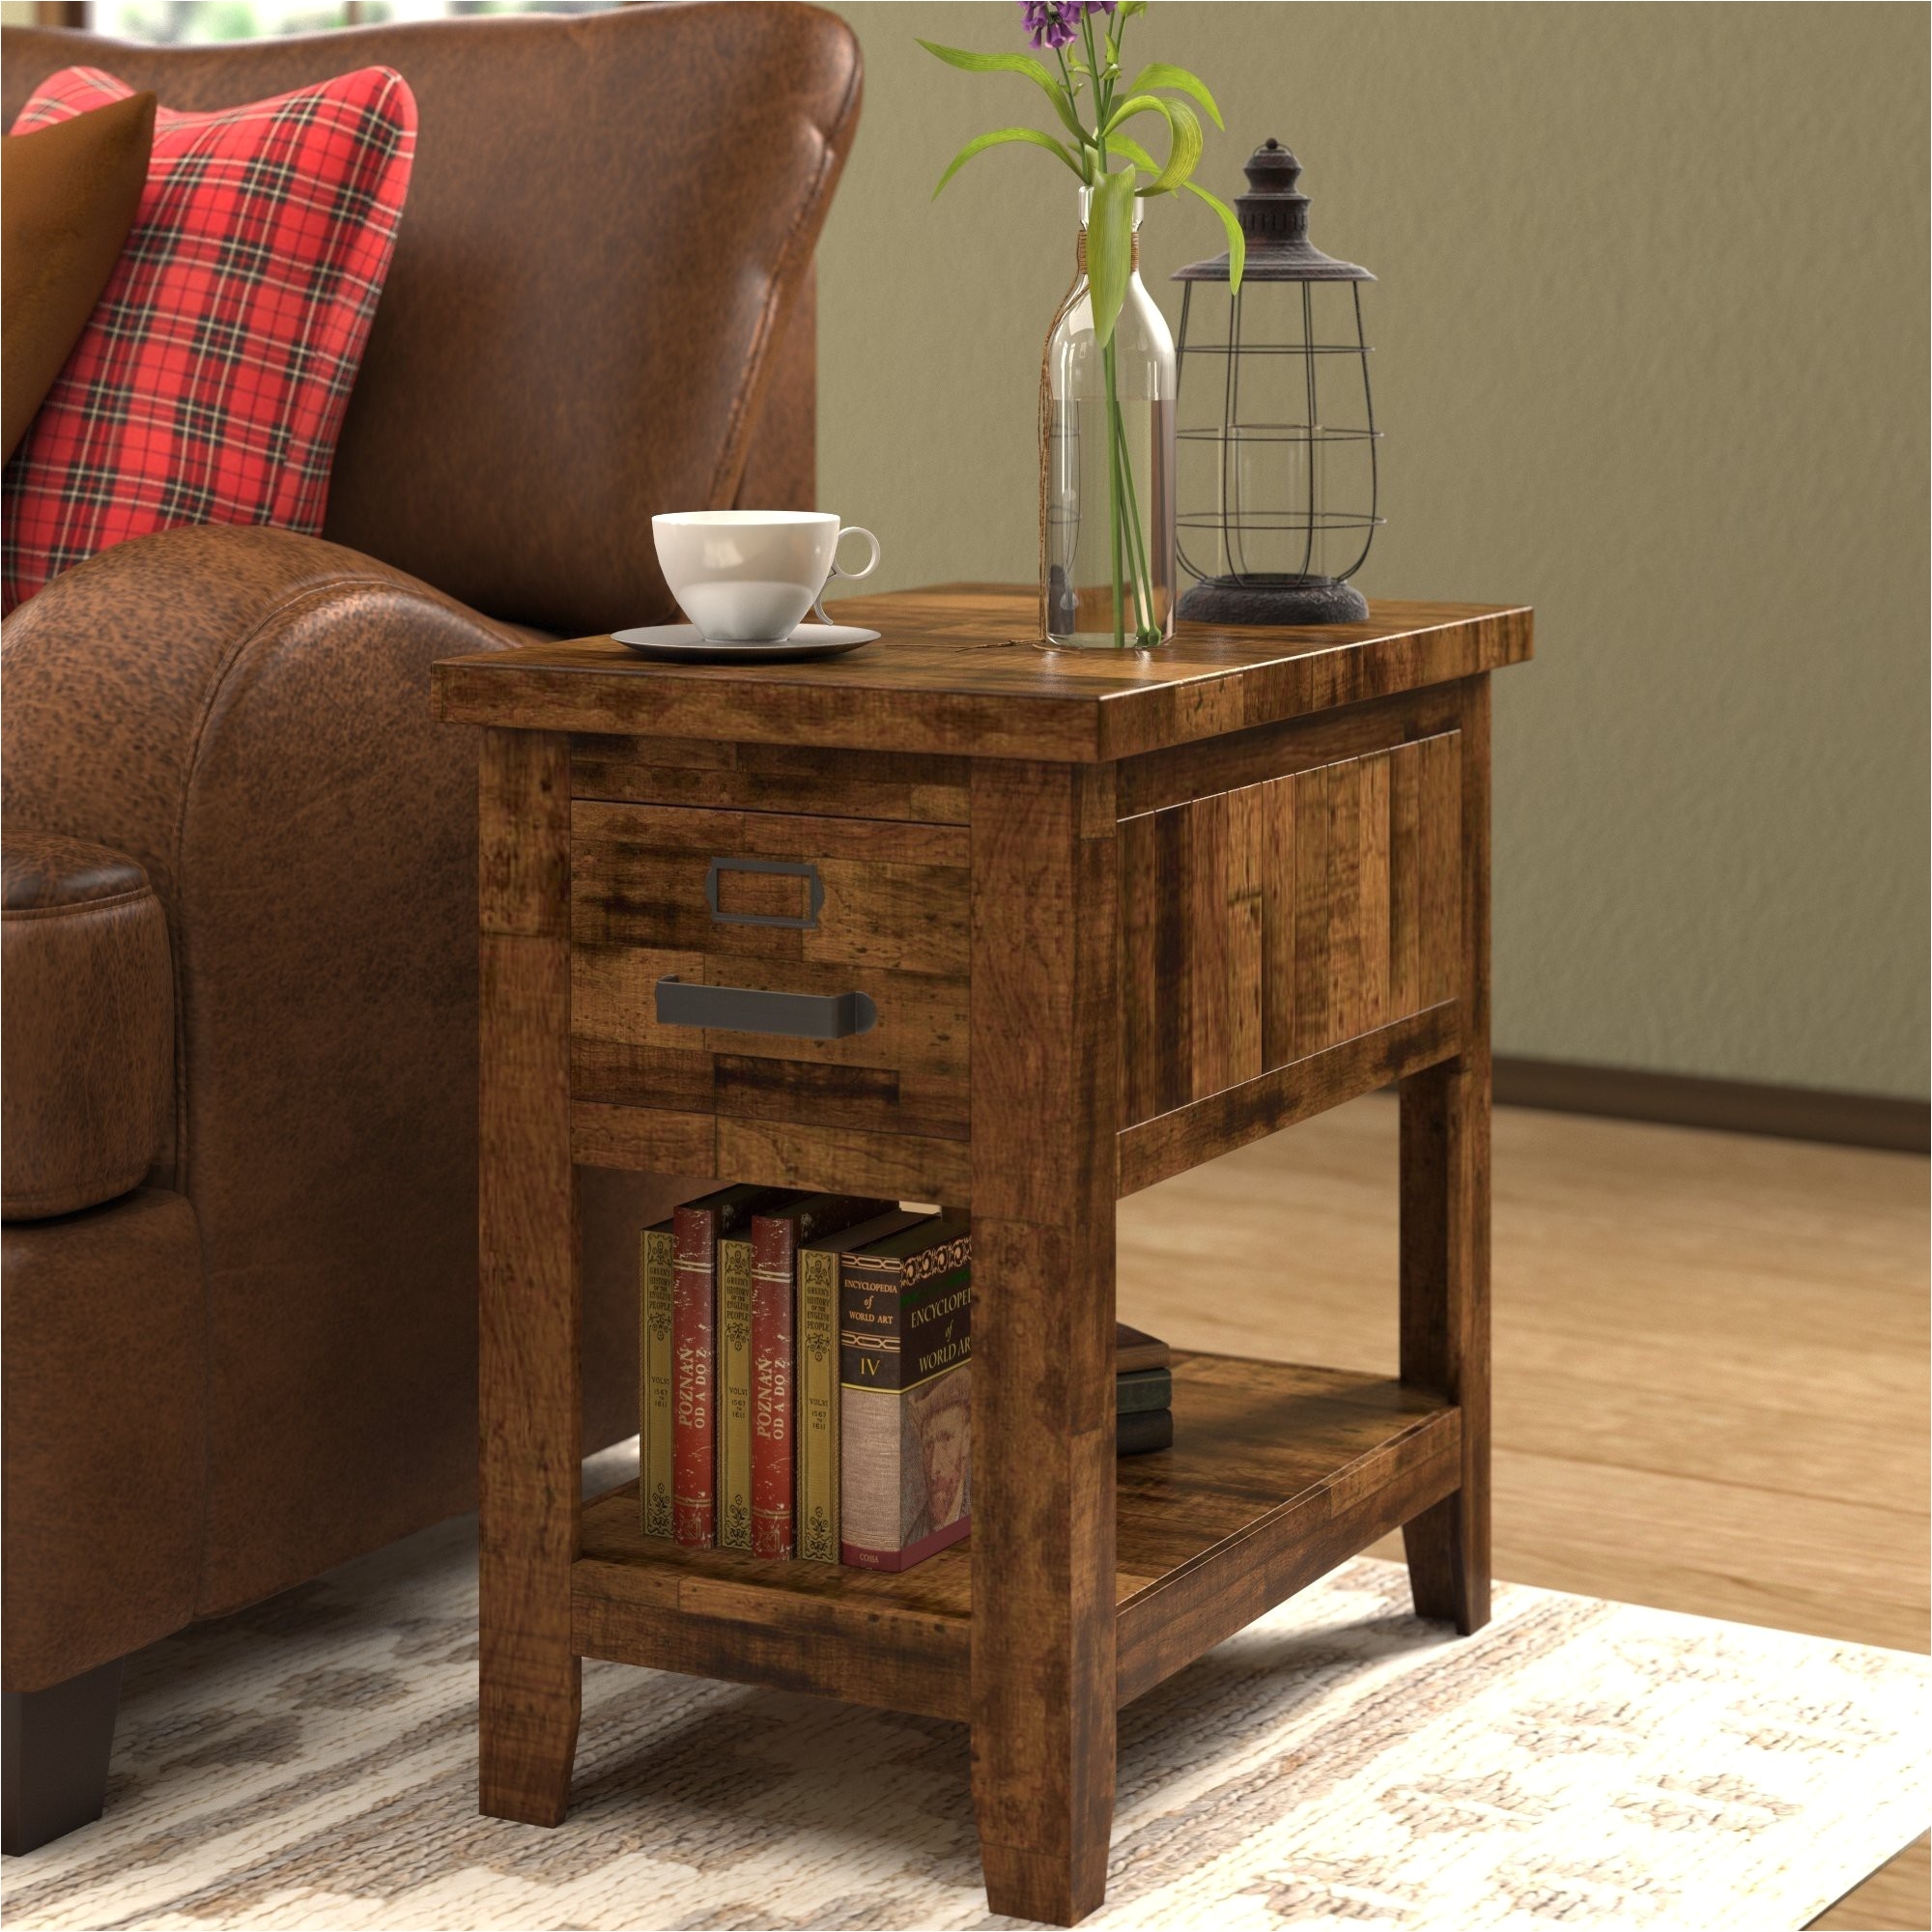 Marvellous Lamp Tables For Living Room New Cheap Rustic Coffee Tables Fresh Awesome Rustic Coffee And End